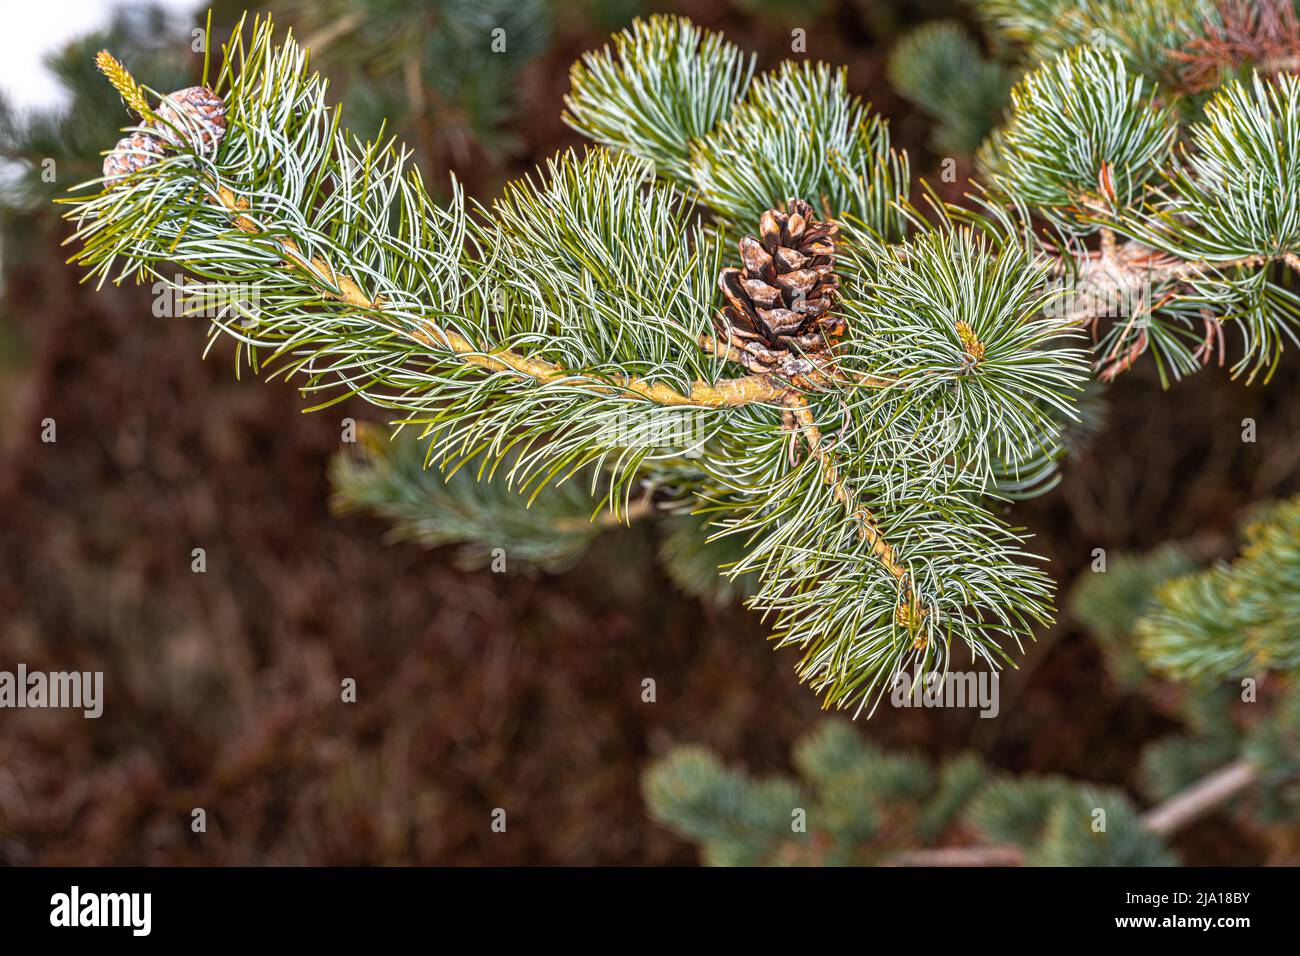 Leaves and Cone of Japanese White Pine (Pinus parviflora) Stock Photo